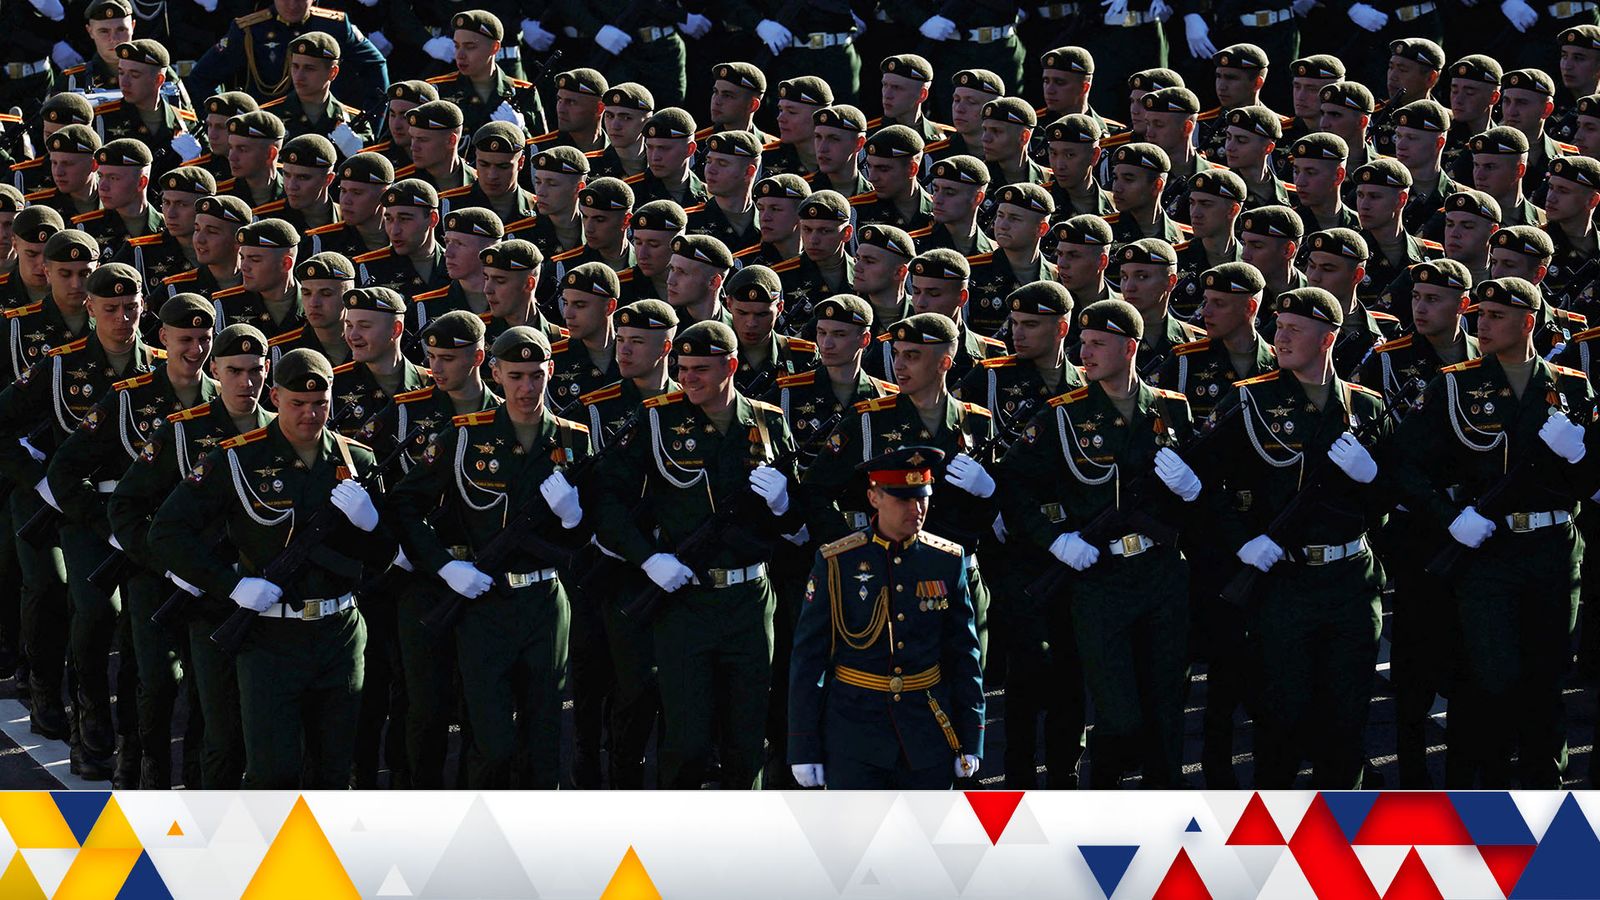 Victory Day: This was not a normal parade with many having bought into the Kremlin's narrative